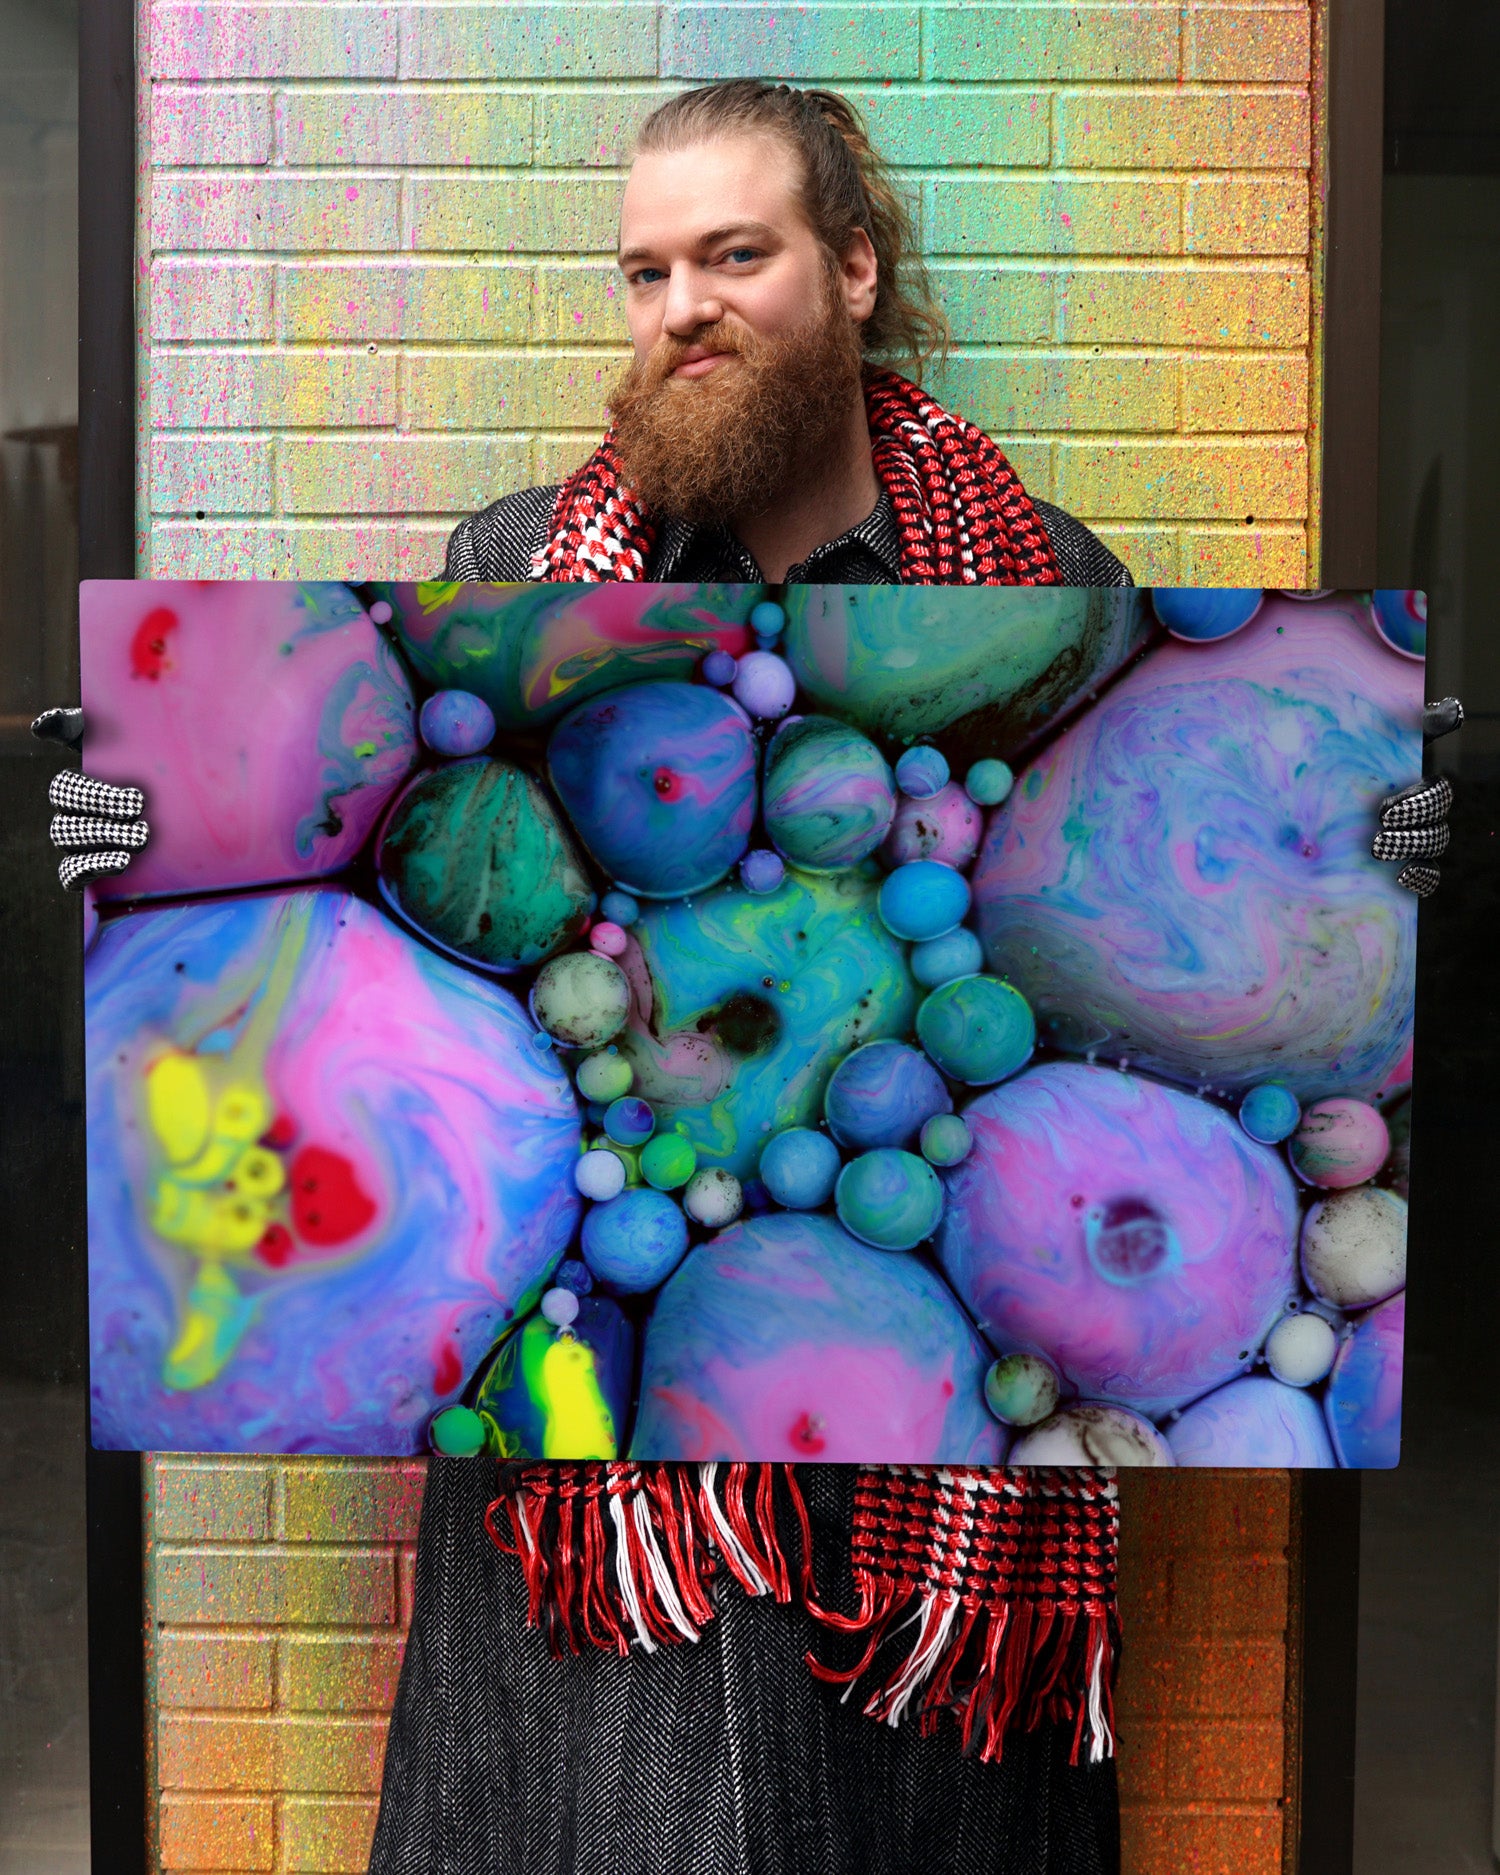 Seb Duke, "The Big in the Small", holding art photo, "The Truth Emerges"